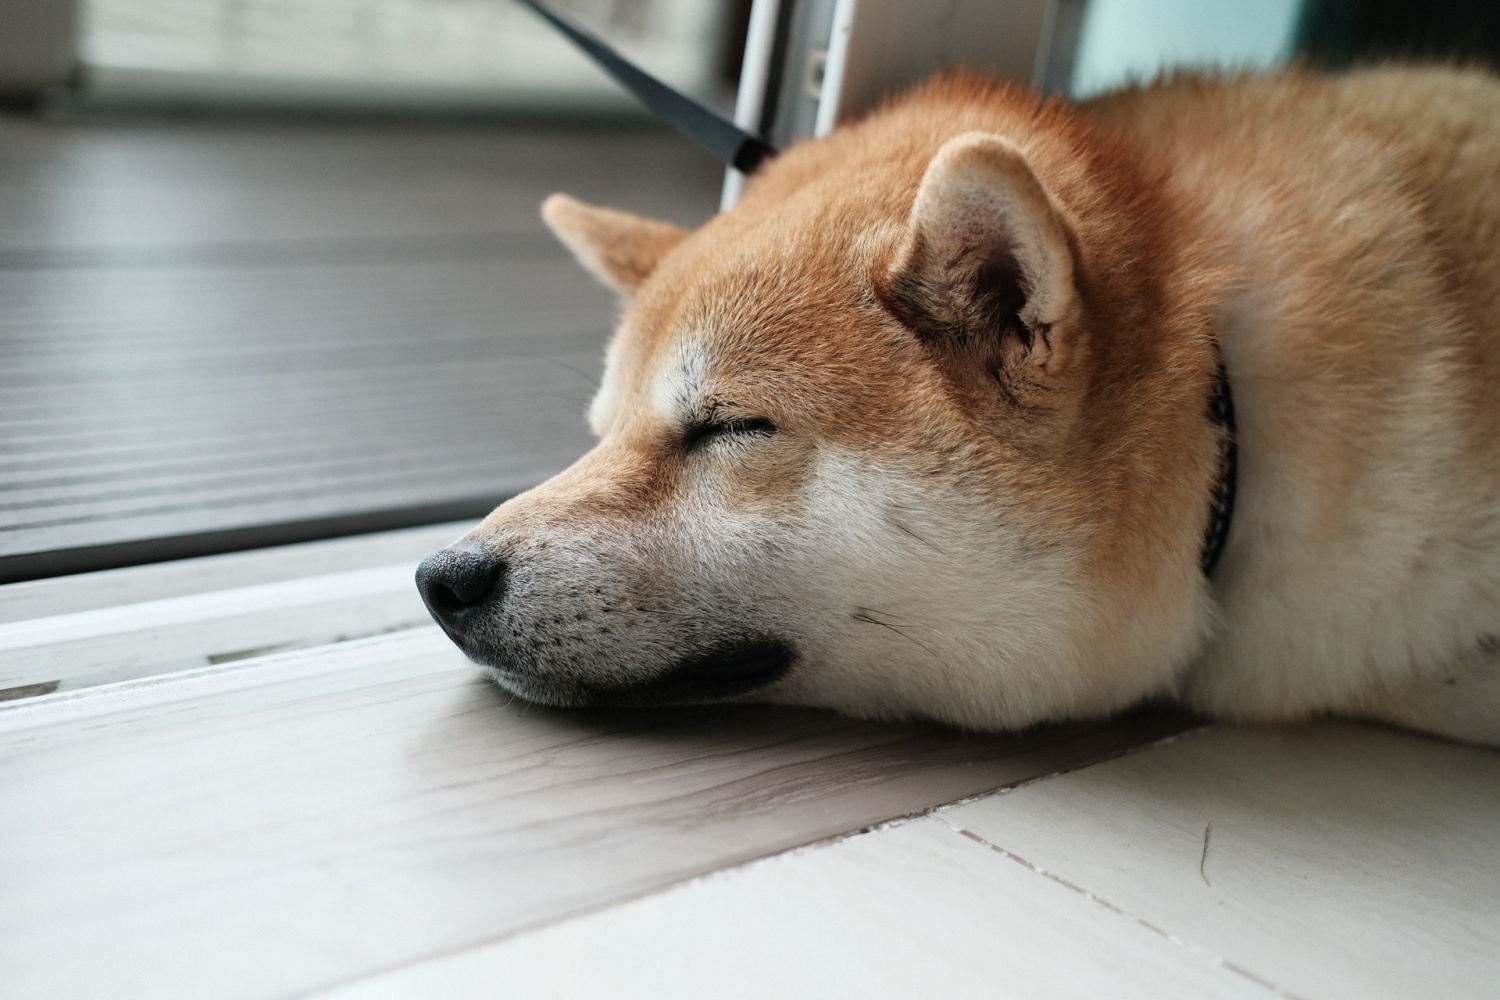 BabyDoge Now has More Hodlers than Shiba Inu | Is This True?